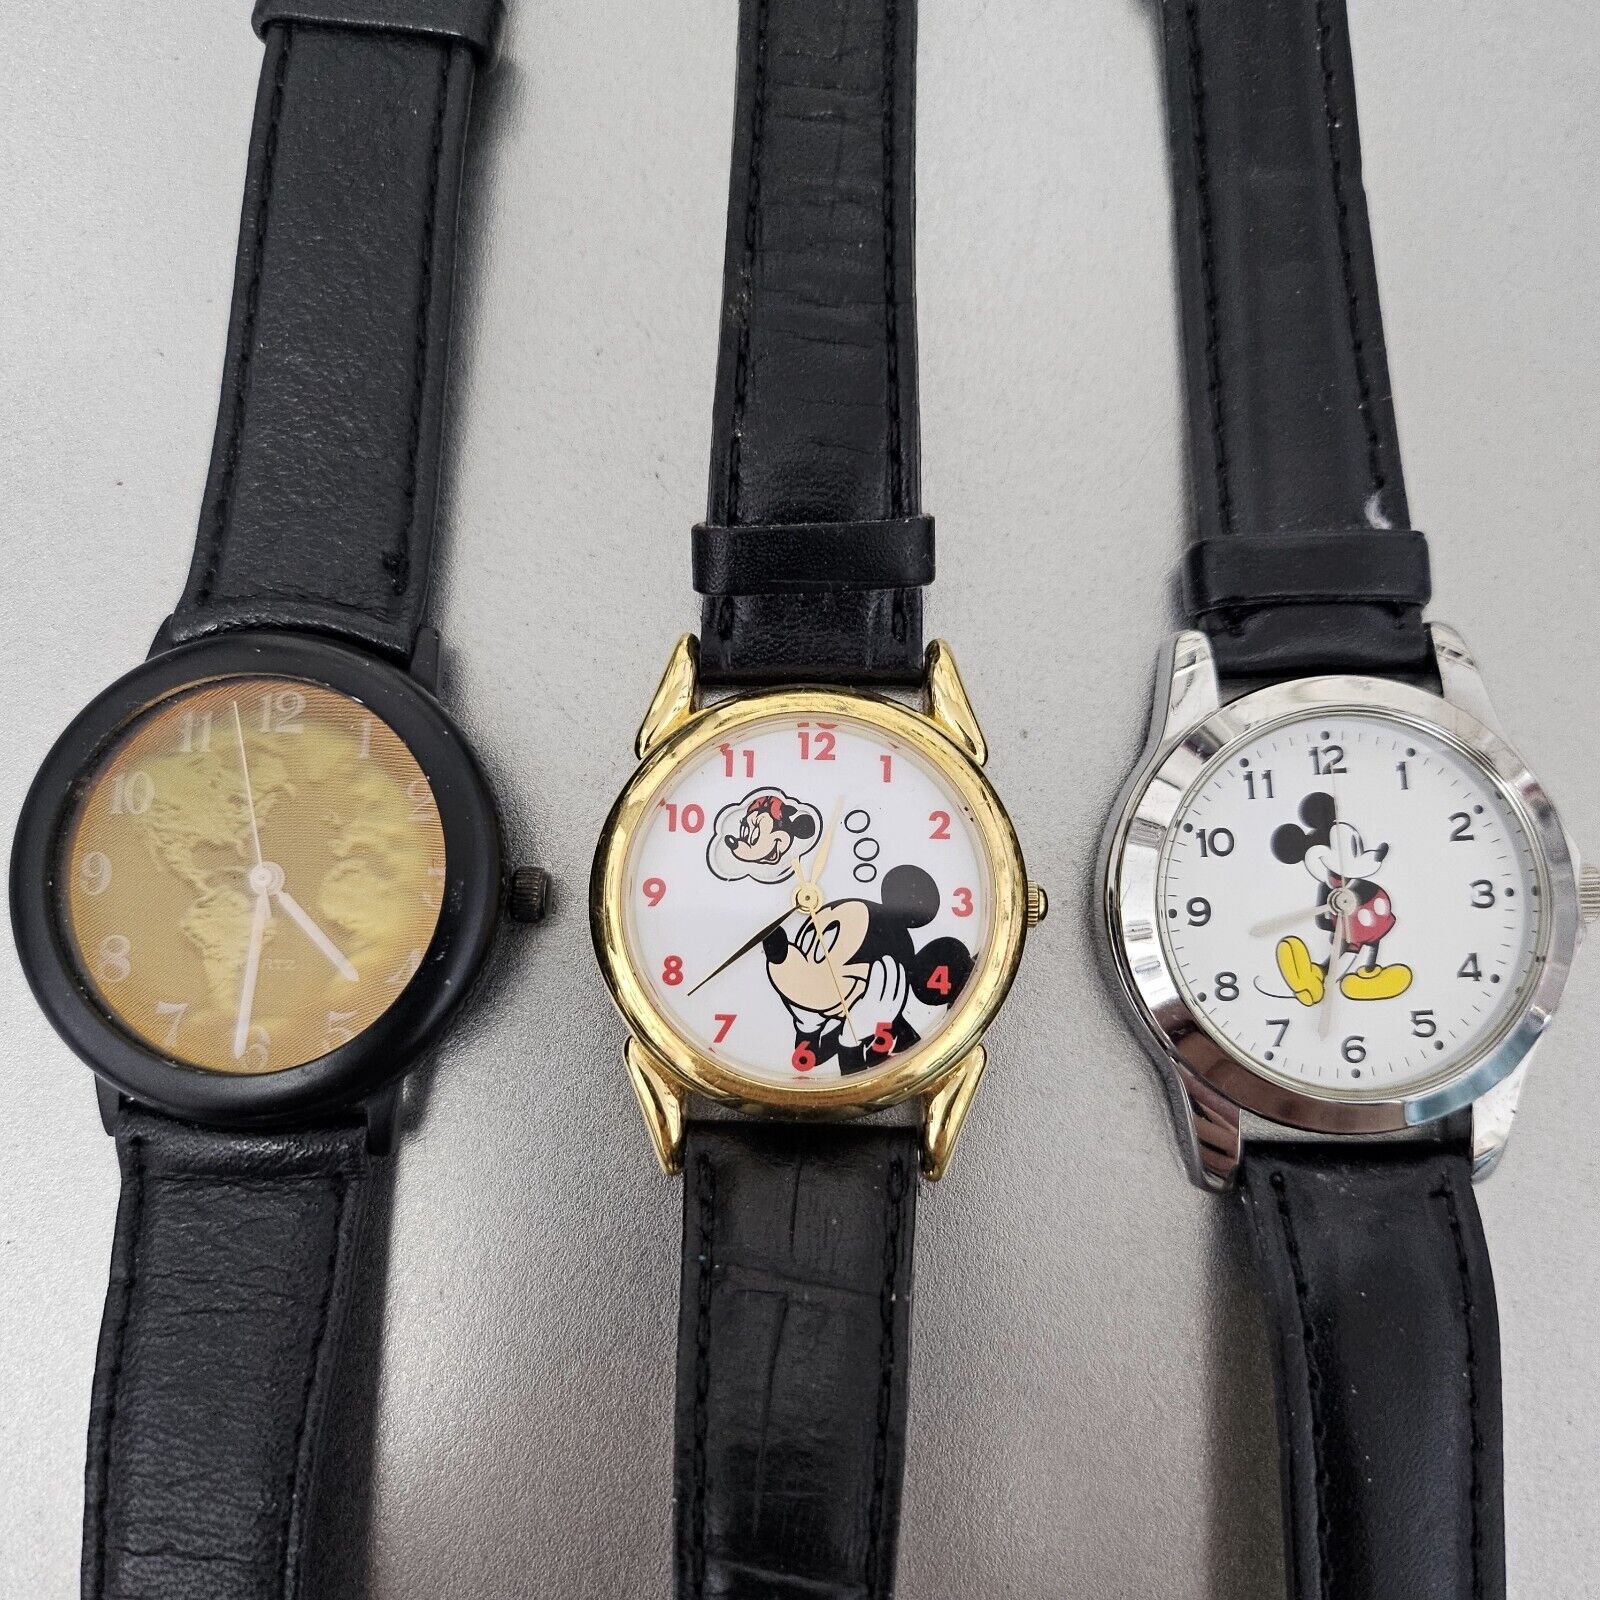 (Working) Vintage Rotating Window Mickey Mouse Disney watch watches b9